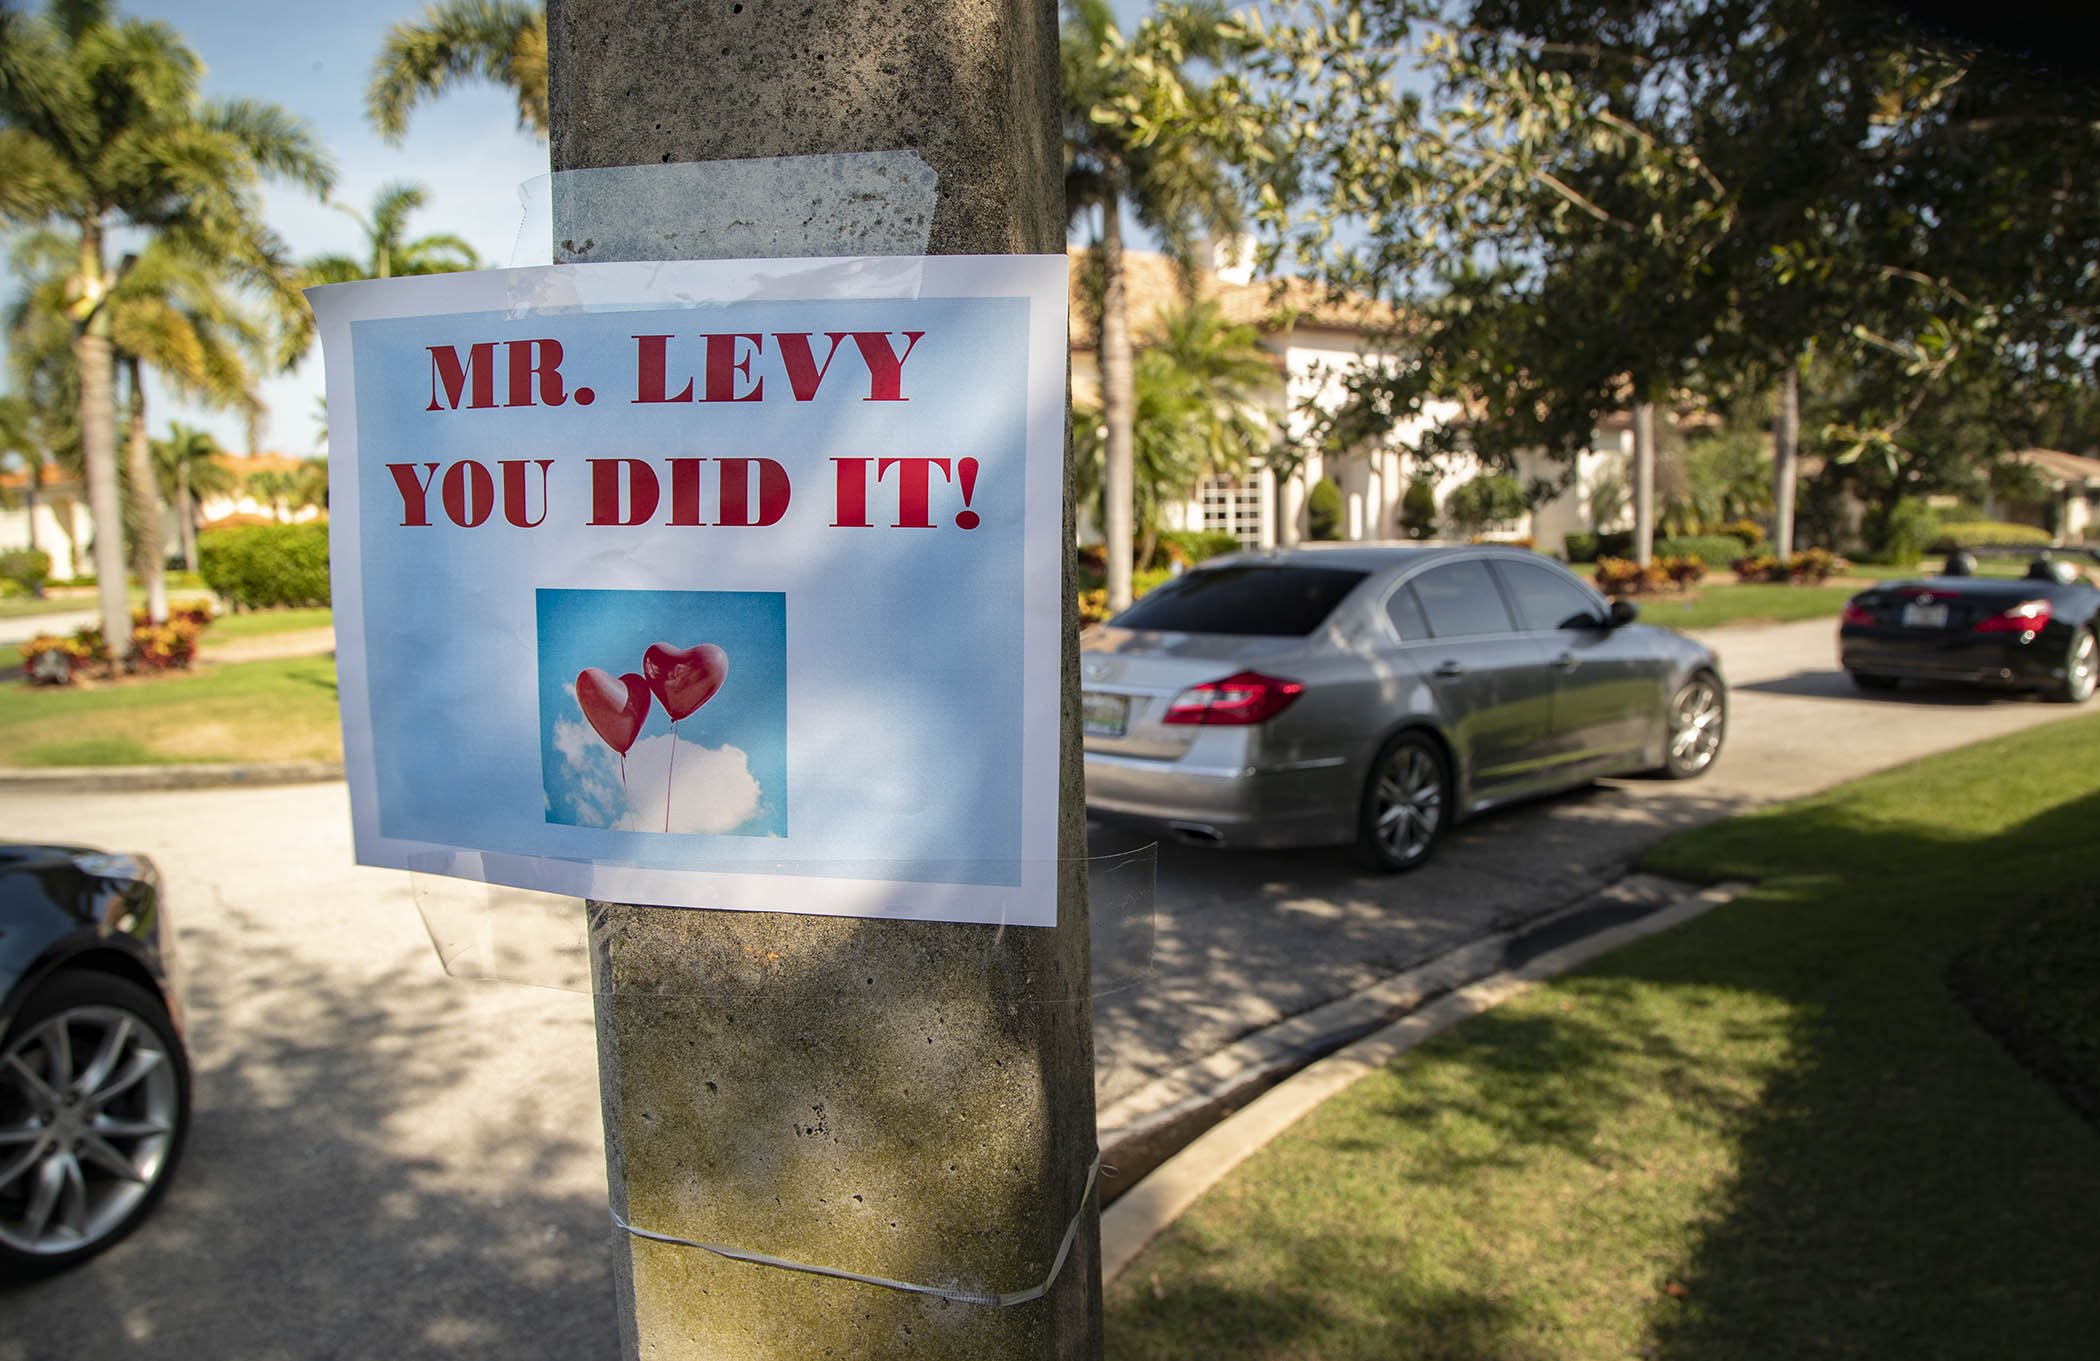 “Mr. Levy you did it,” says the sign outside the Boca Raton home of Alan Levy, who survived a hospital stay with COVID-19.